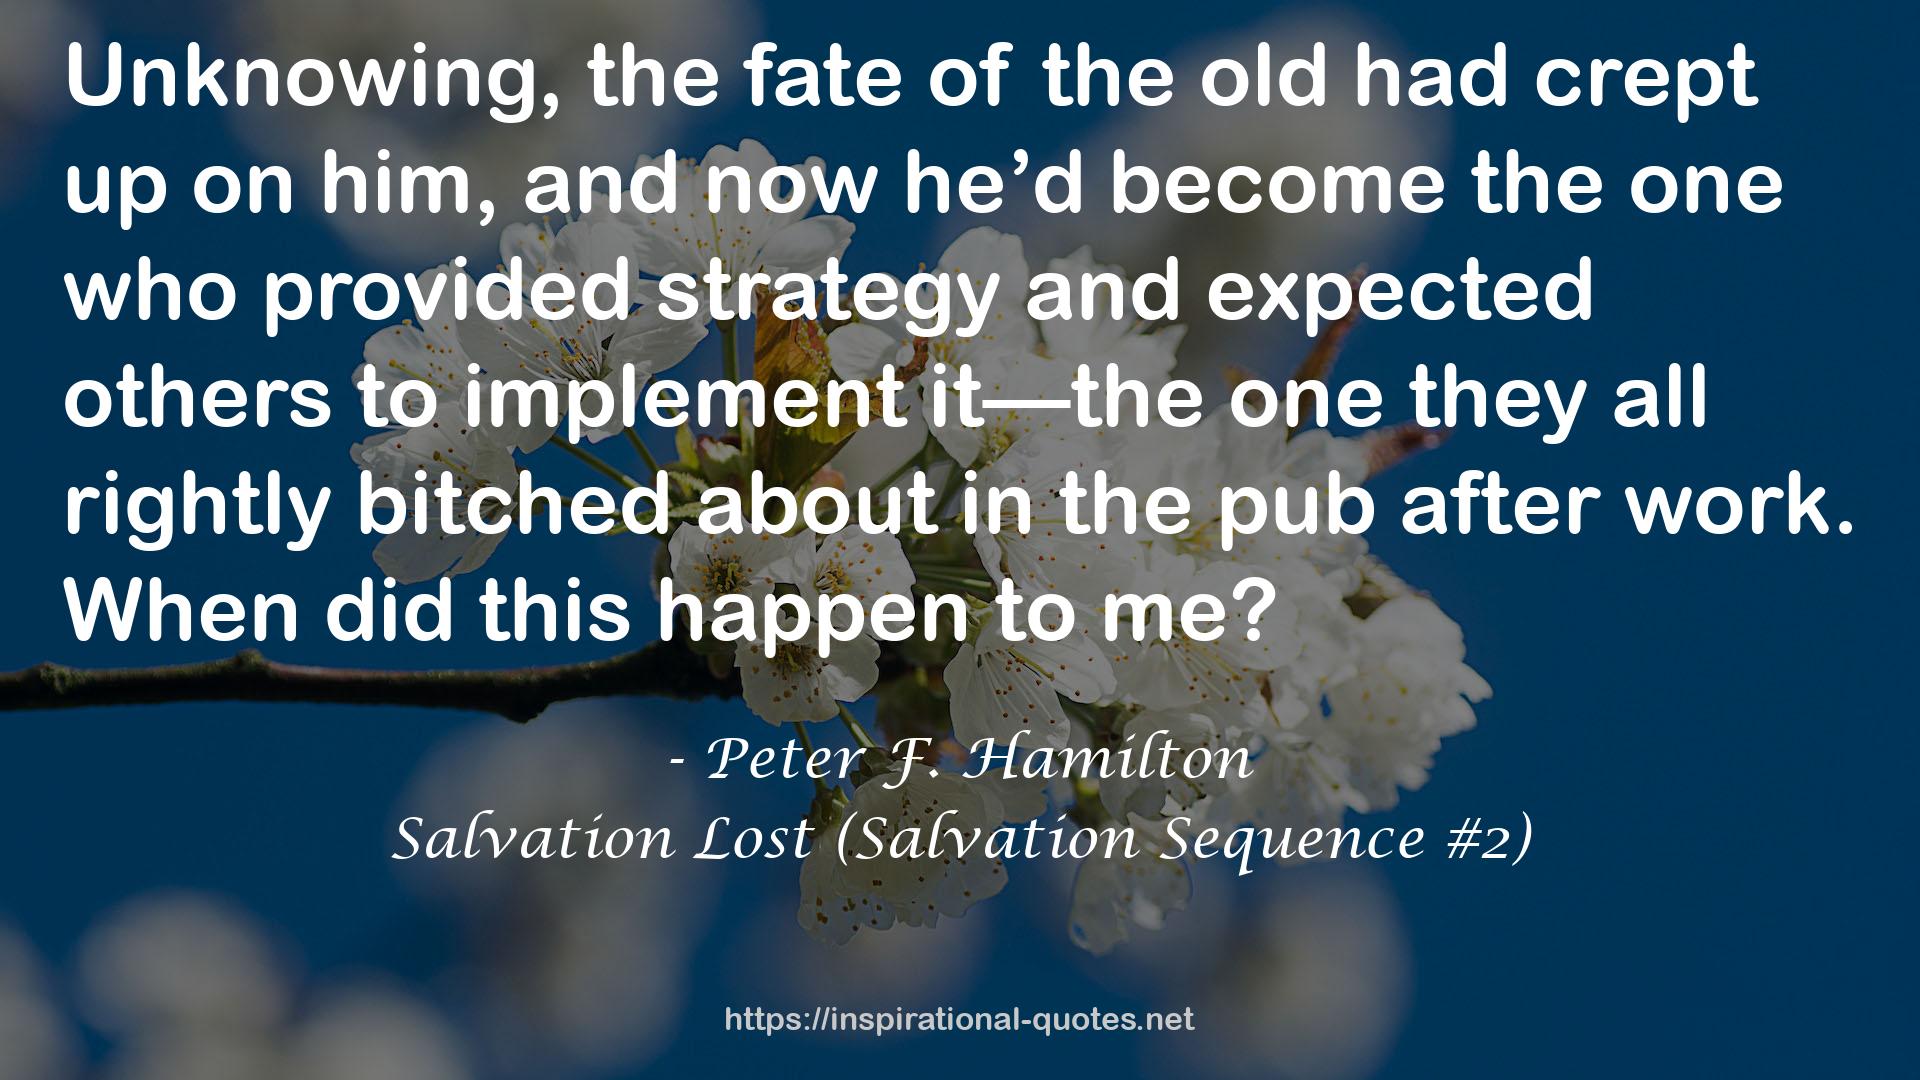 Salvation Lost (Salvation Sequence #2) QUOTES